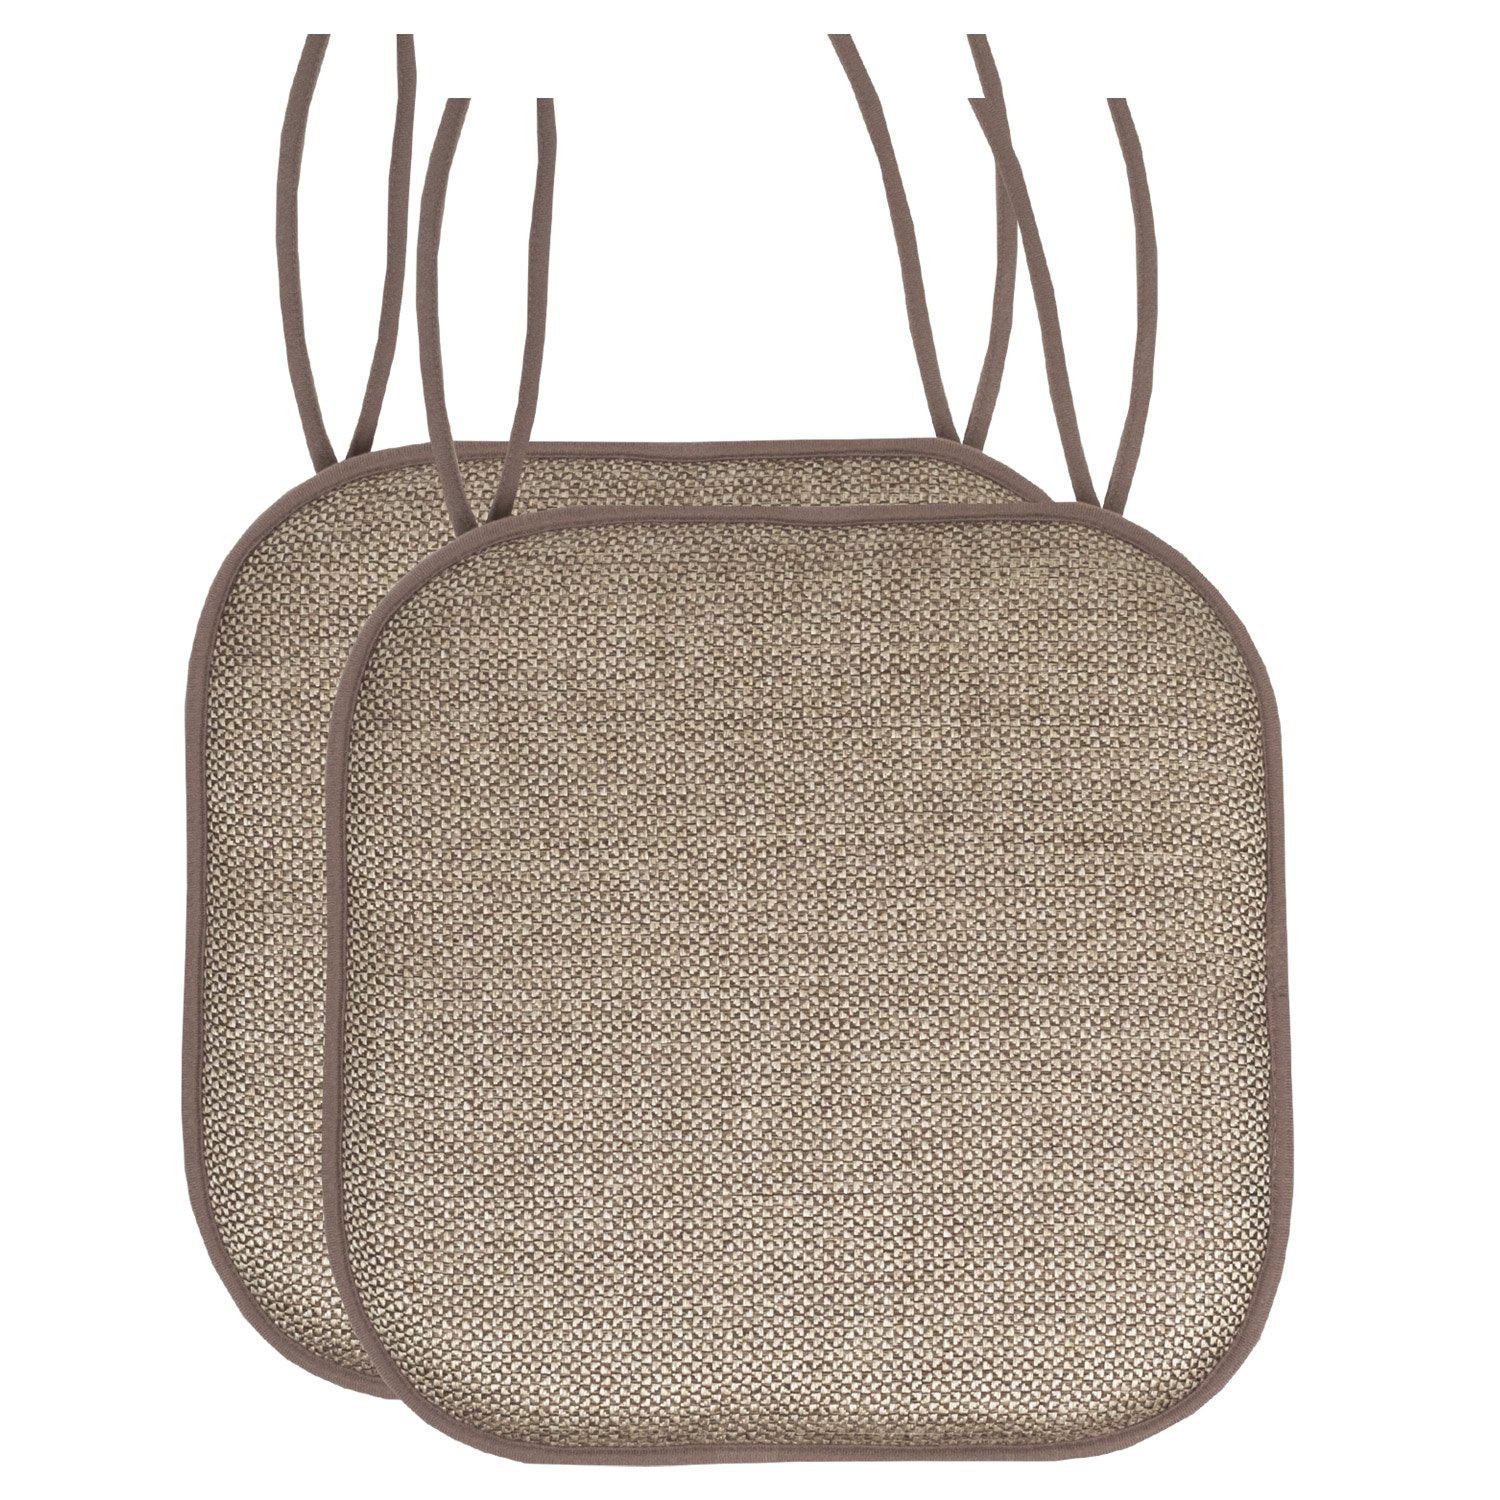 Cameron Chair Cushion Set with Ties Beige Brown 2-Pack